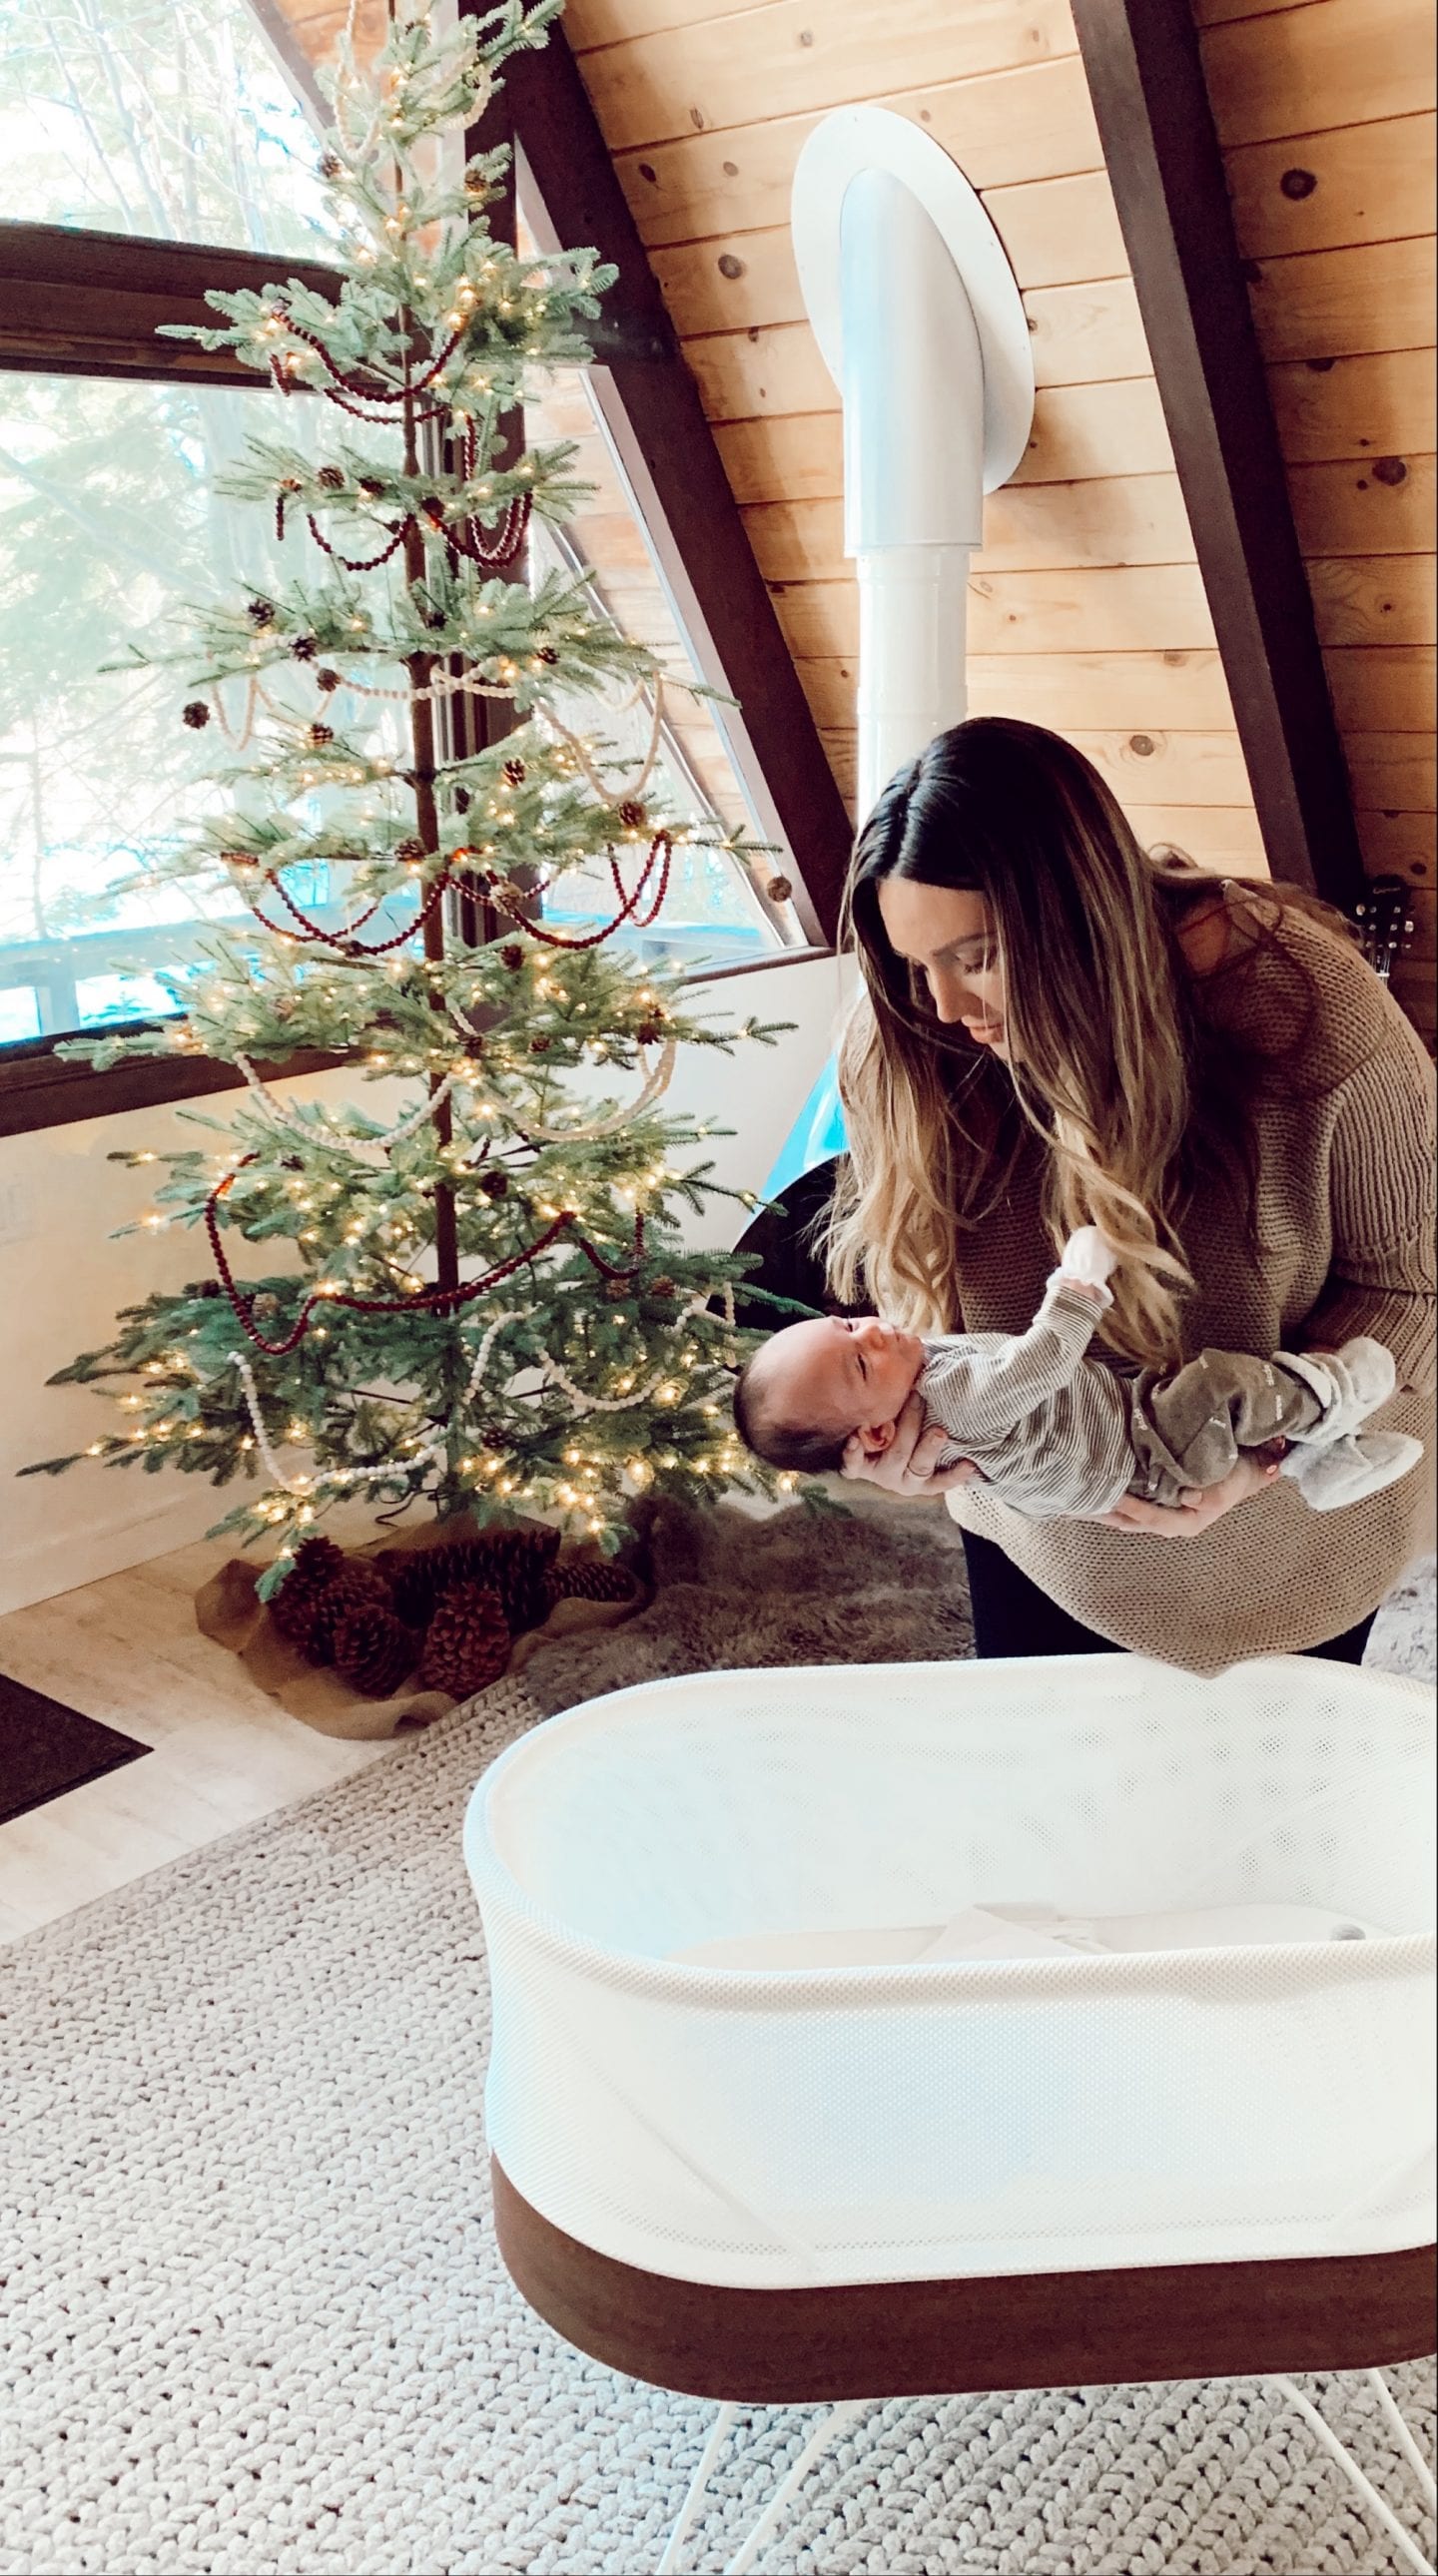 snoo review | Baby Snoo Bassinet Review by popular San Francisco life and style blog, Just Add Glam: image of a mom putting her baby in a Snoo Bassinet. 